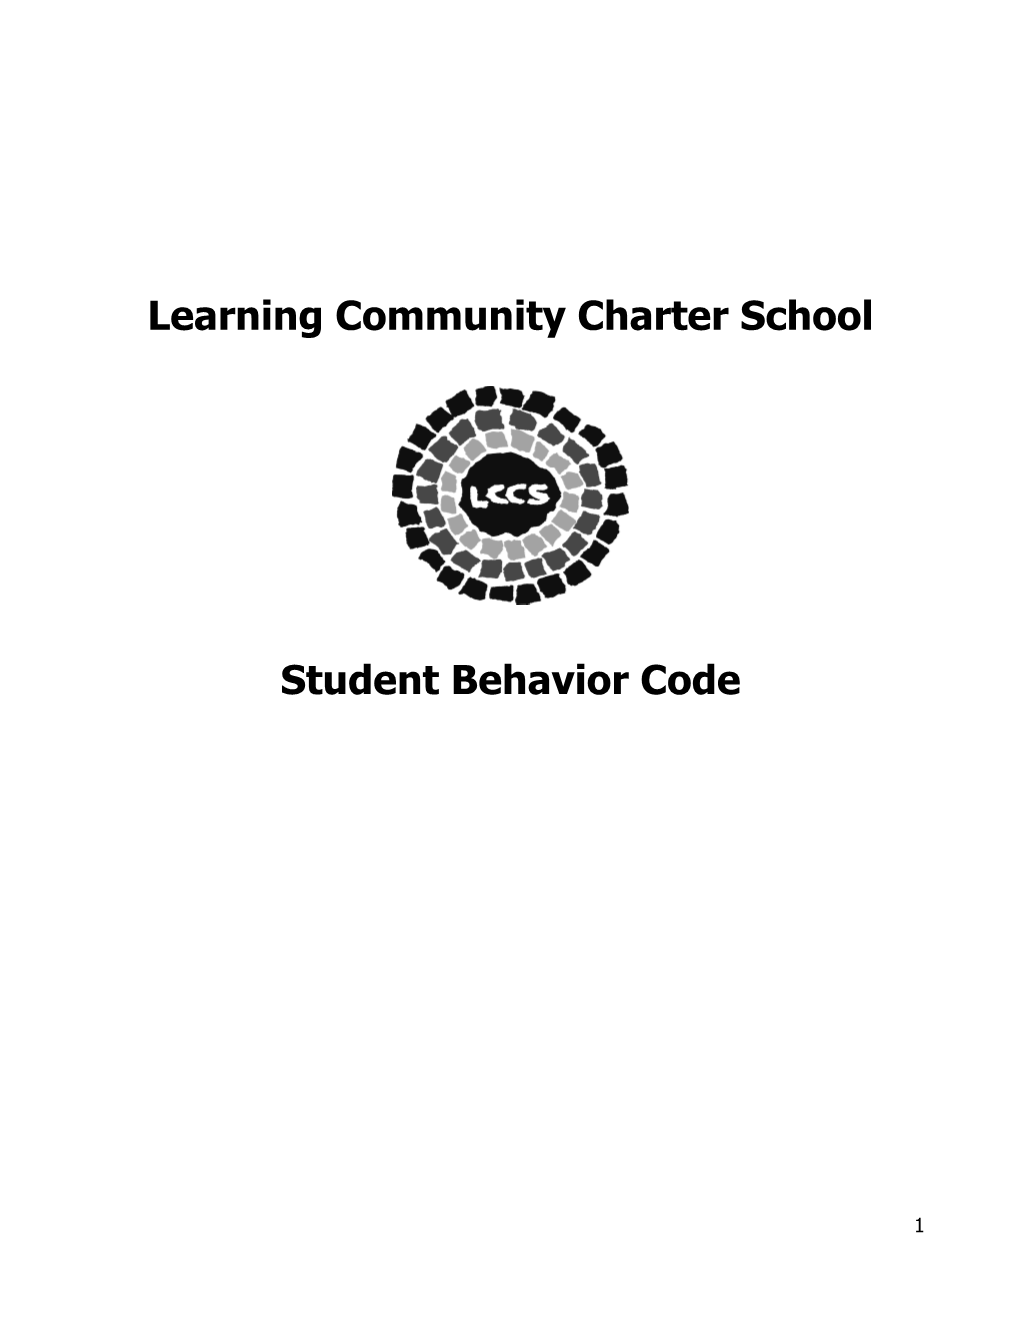 The Learning Community Charter School (LCCS) Student Code Applies to Any Student Who Is